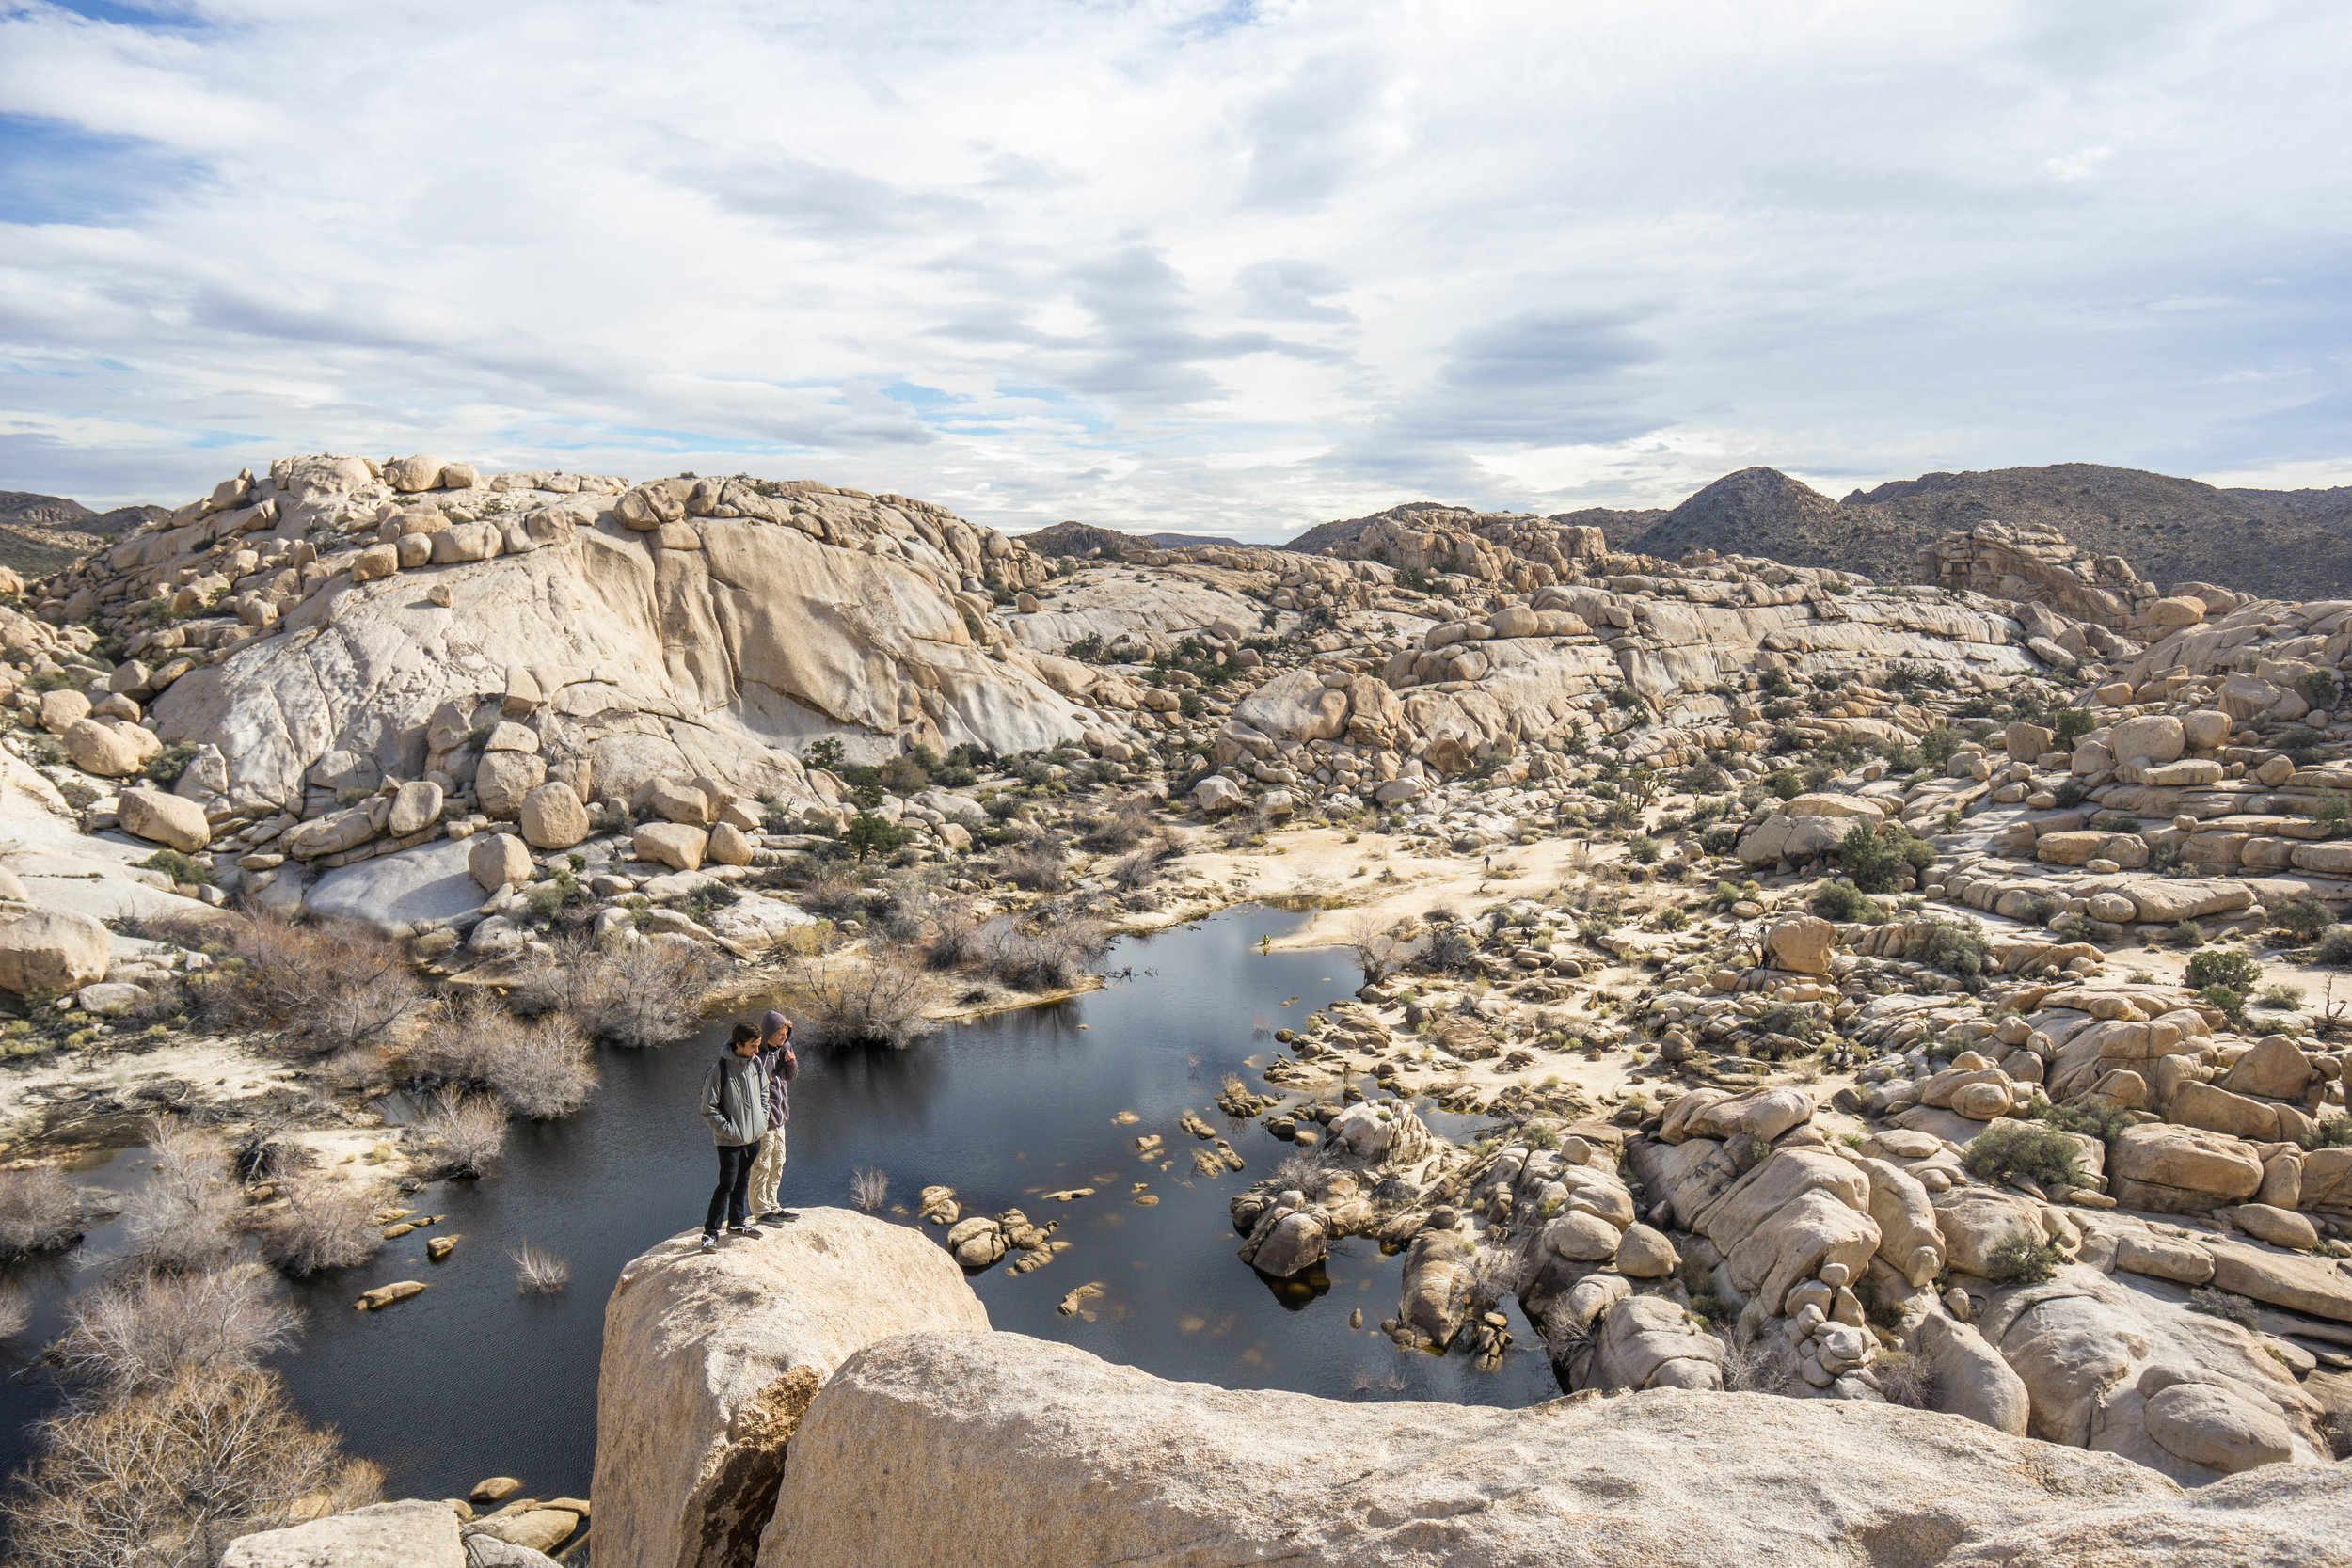 Joshua Tree has no natural lakes, making Barker Dam a refreshing site in the normally bone-dry desert.